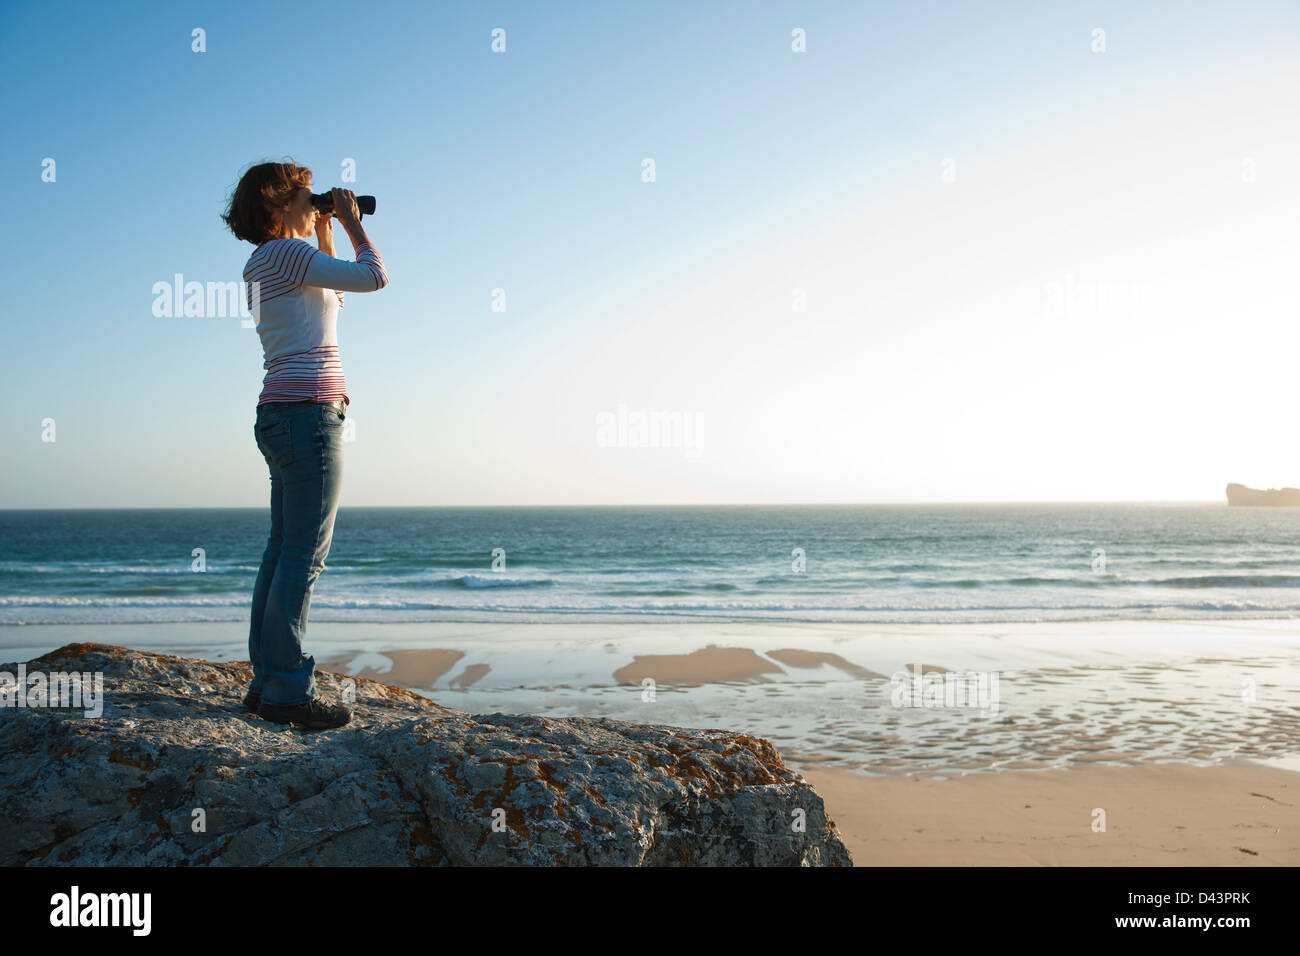 Woman Looking into the Distance Using Binoculars at the Beach, Camaret-sur-Mer, Crozon Peninsula, Finistere, Brittany, France Stock Photo